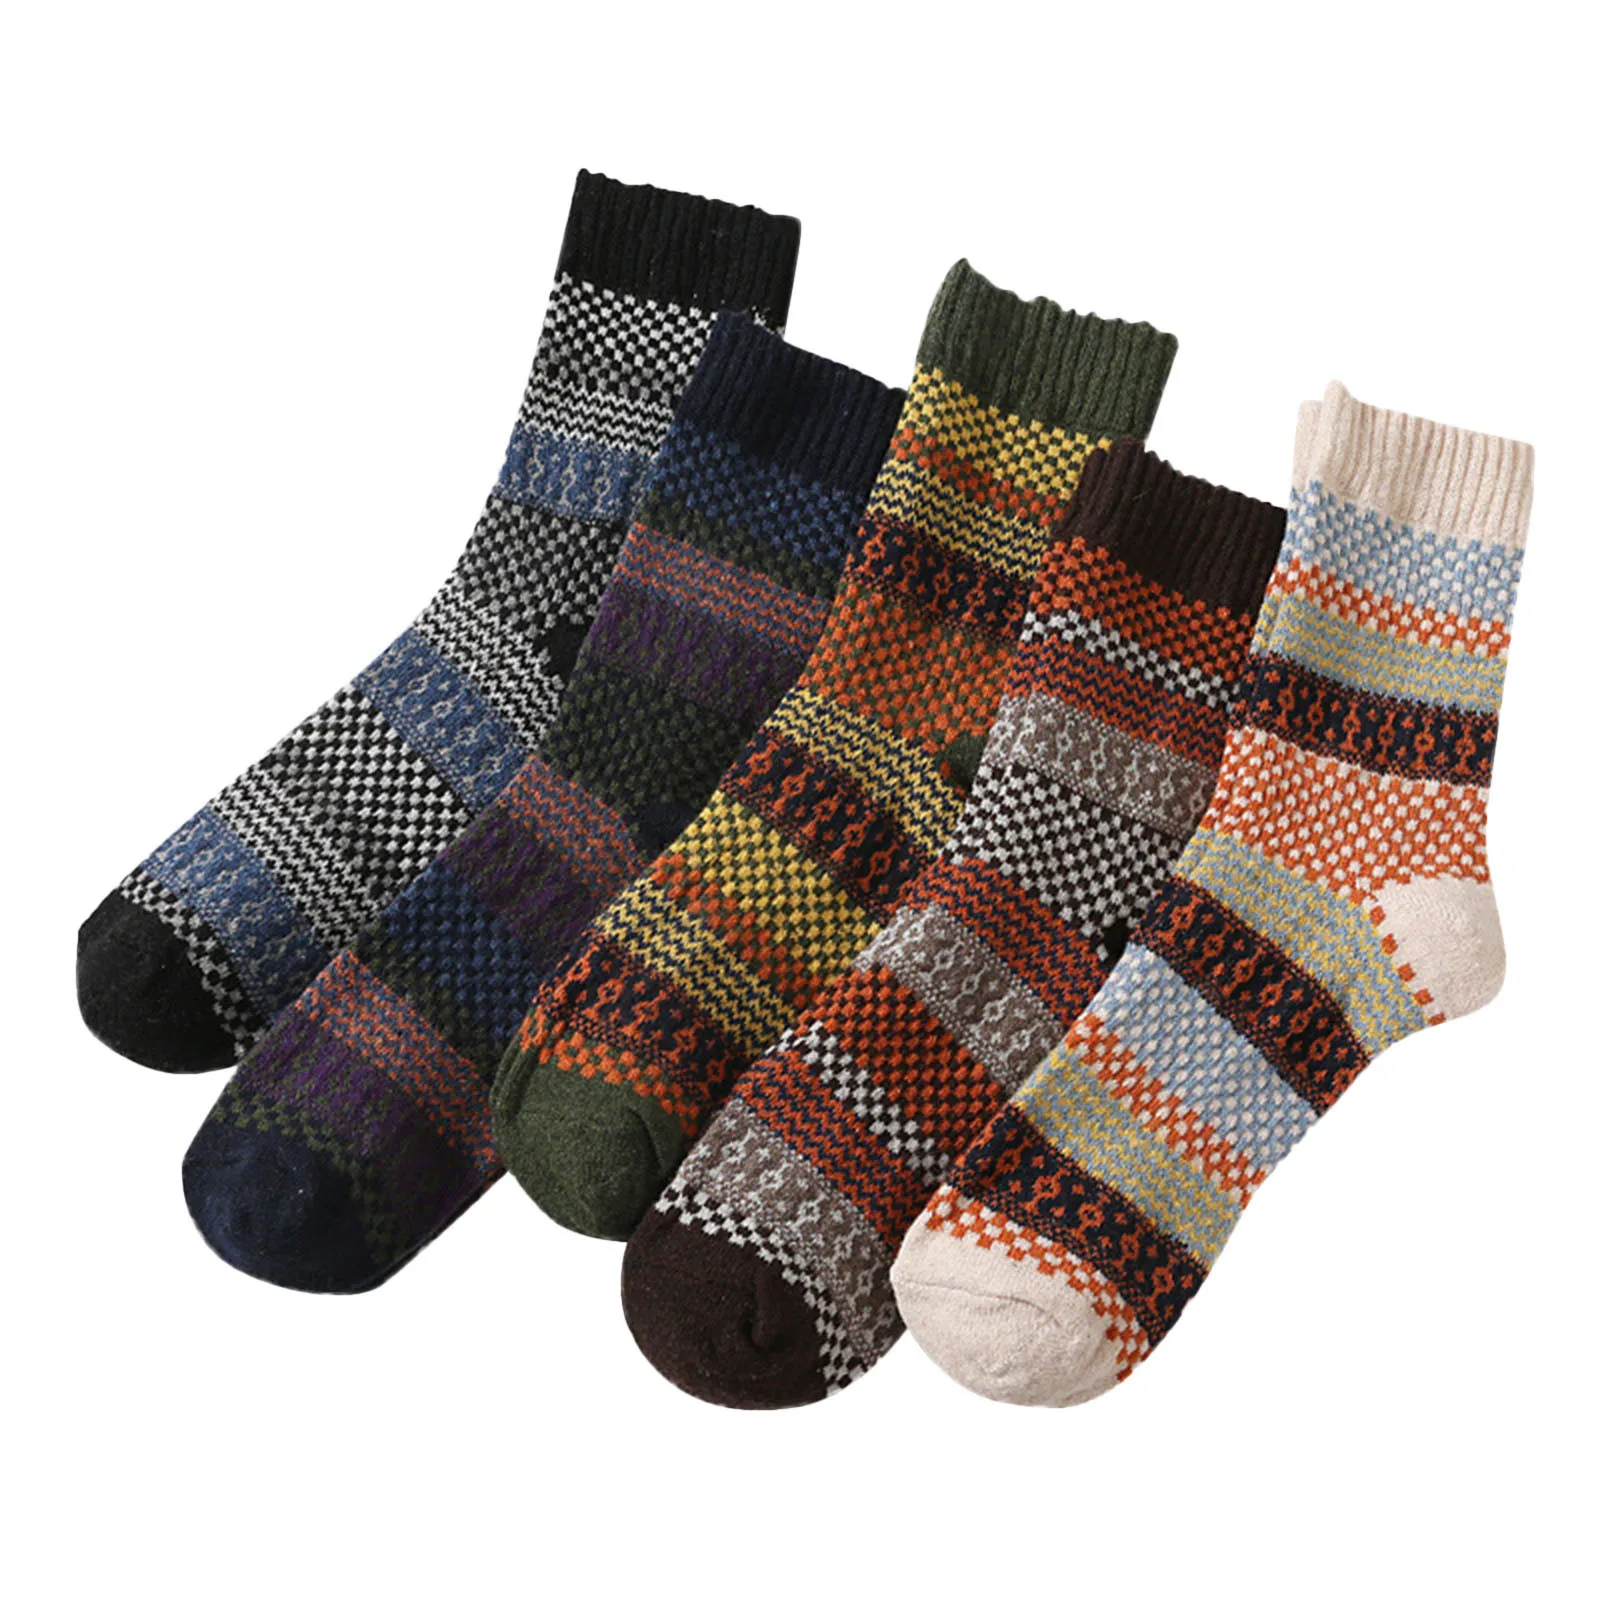 

5pairs/lot New Witner Thick Warm Wool Women Socks Vintage Christmas Socks Couple Cotton Colorful Socks Gift Free Size #T2G